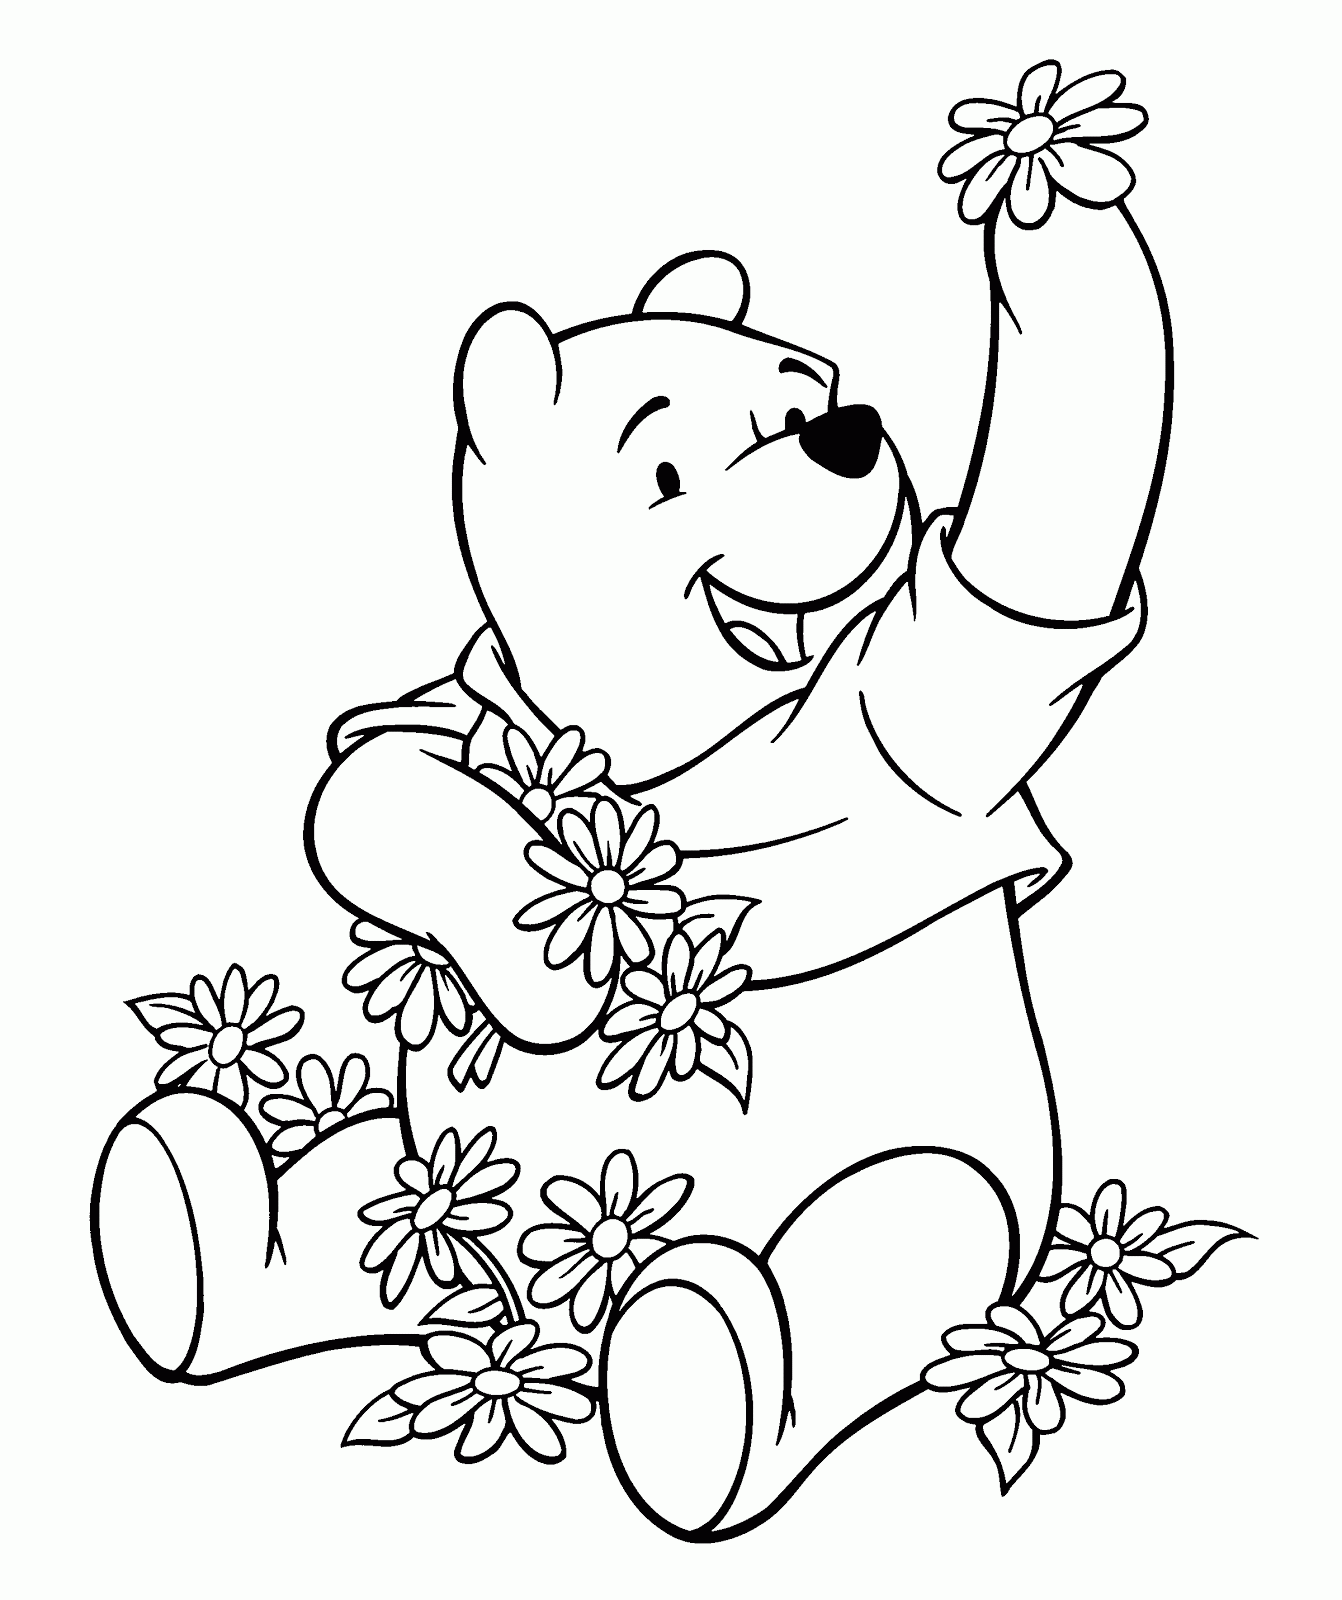 Disney Animal Winnie The Pooh Characters Coloring Pages